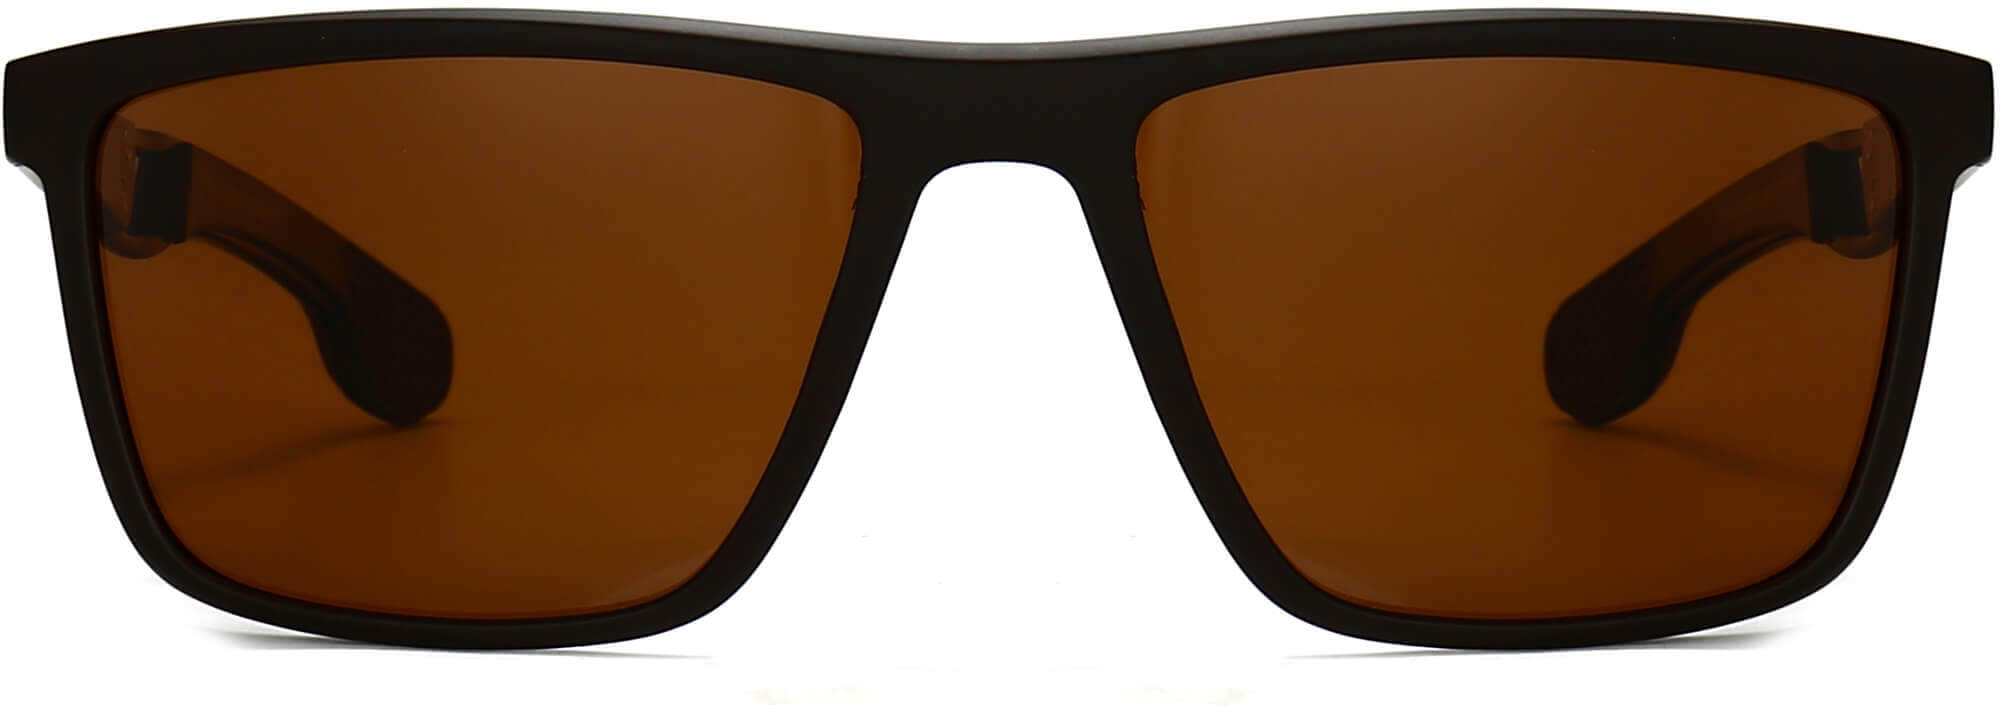 Charlie Brown TR 90 Sunglasses from ANRRI, front view